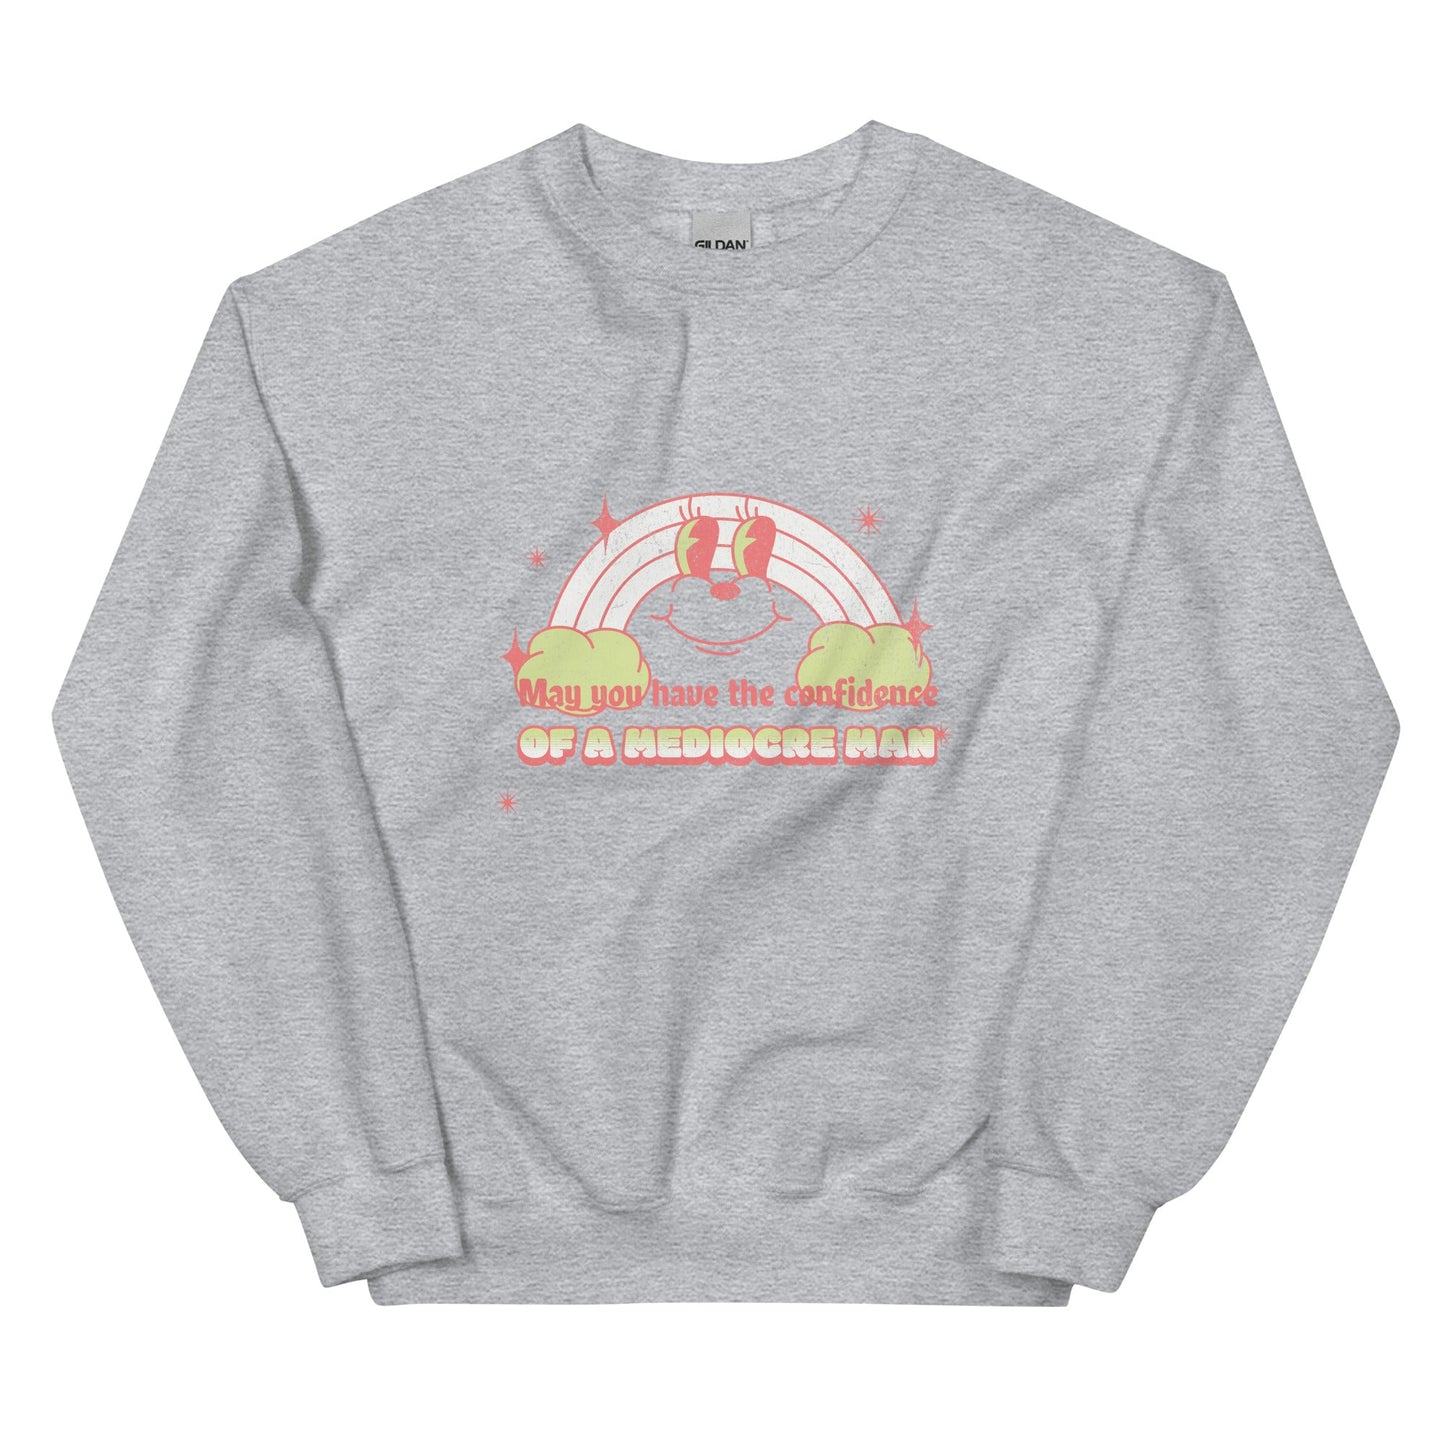 May You Have the Confidence of a Mediocre Man Sweatshirt-Sweatshirt-Crimson and Clover Studio